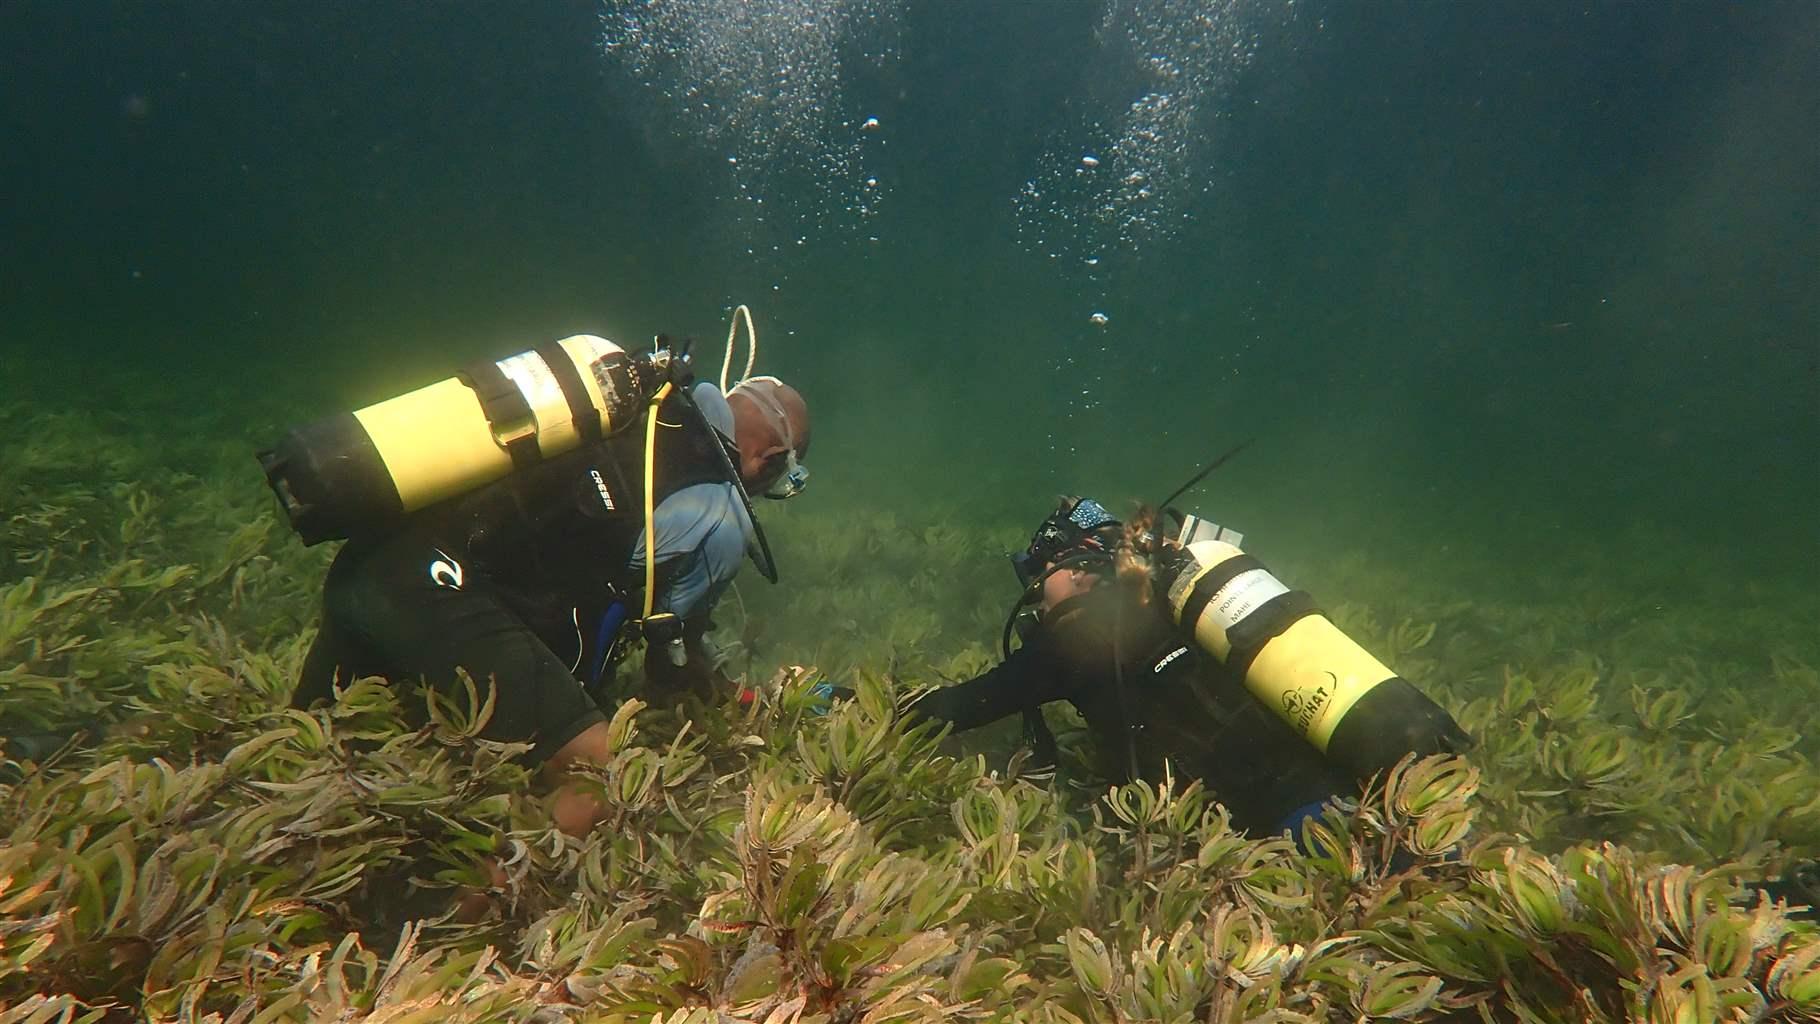 Two scuba divers in wetsuits and wearing yellow air tanks collect samples from an expansive bed of green and yellowish-green vegetation on the seafloor. The water is clear in the foreground and fades to a murky green in the background.